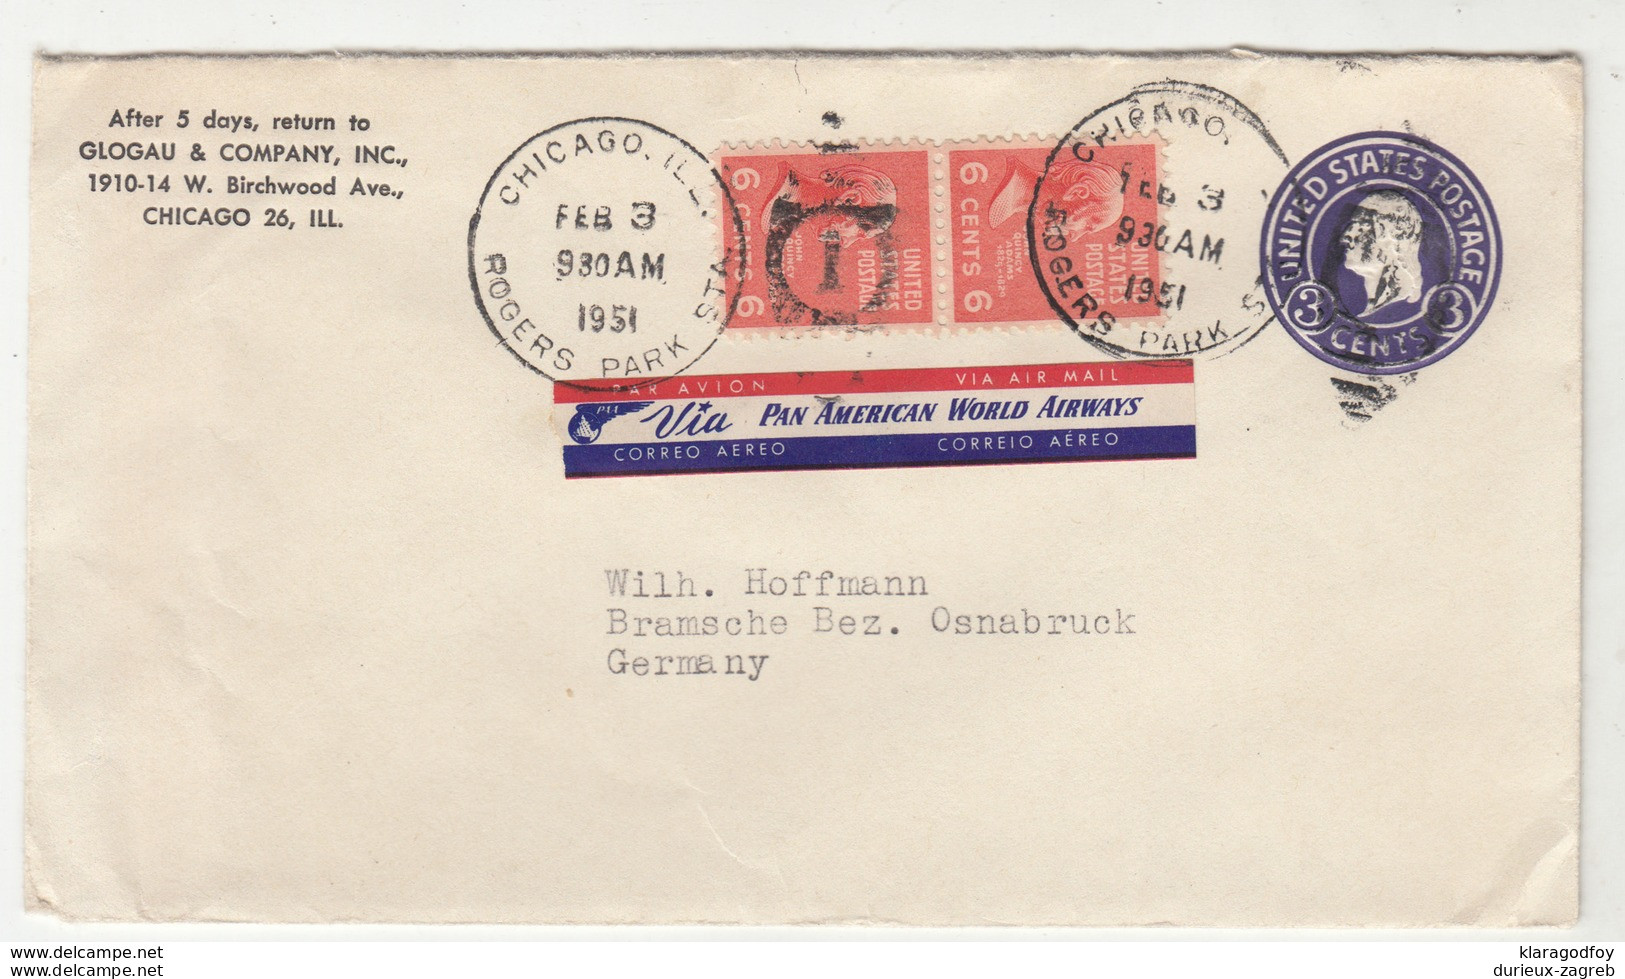 Glogau & Company, Chicago Postal Stationery Letter Cover Travelled Air Mail Pan American 1951 To Germany B190701 - 1941-60